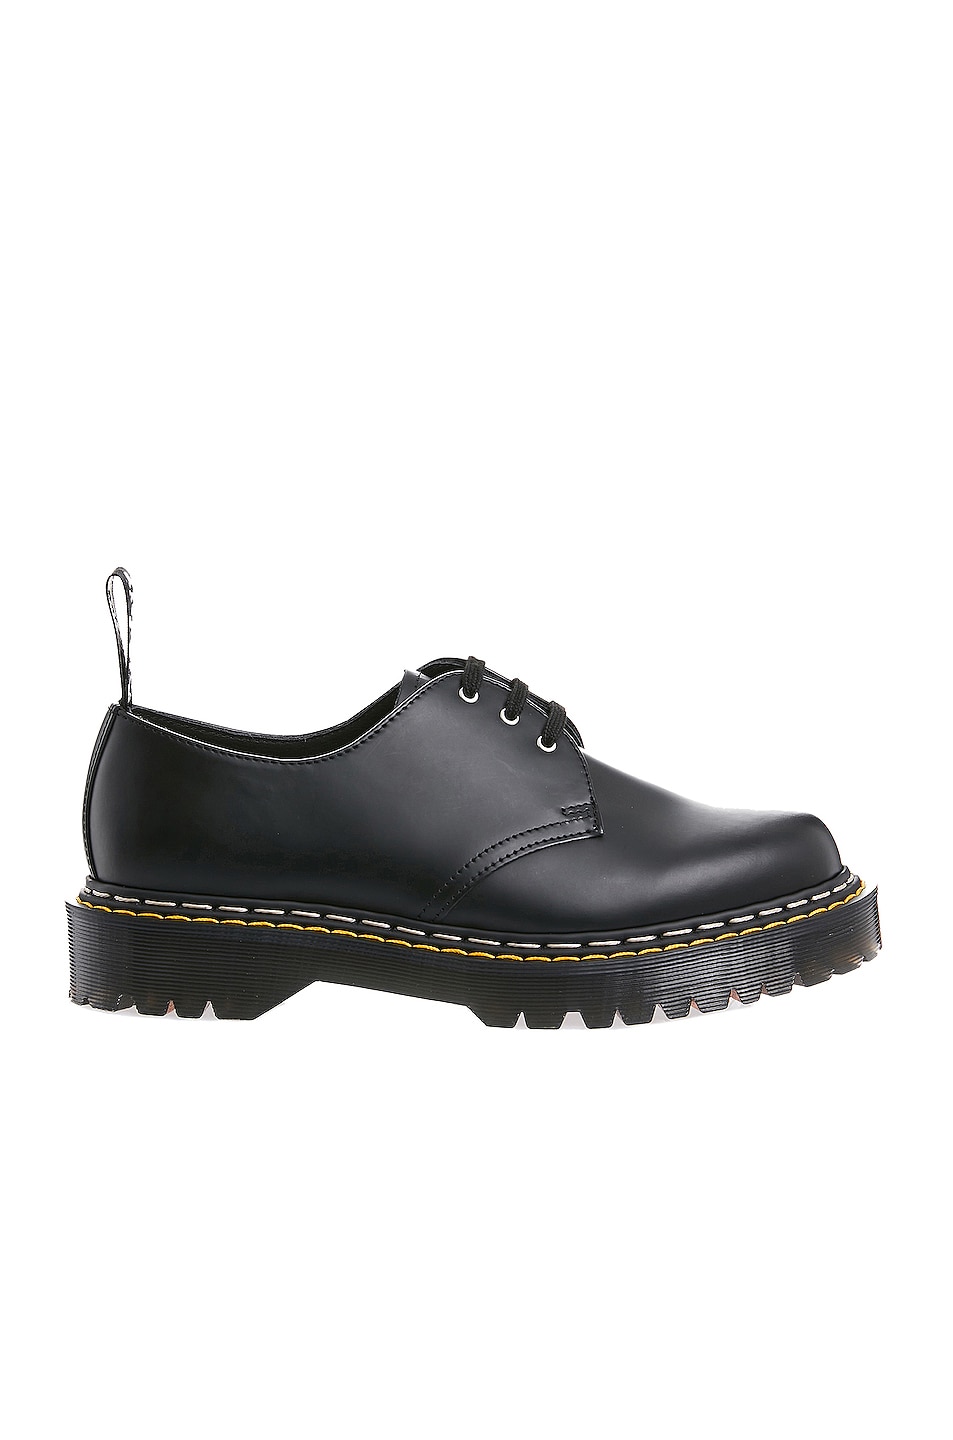 Image 1 of Rick Owens x Dr. Martens Bex Sole Lace Up Shoe in Black